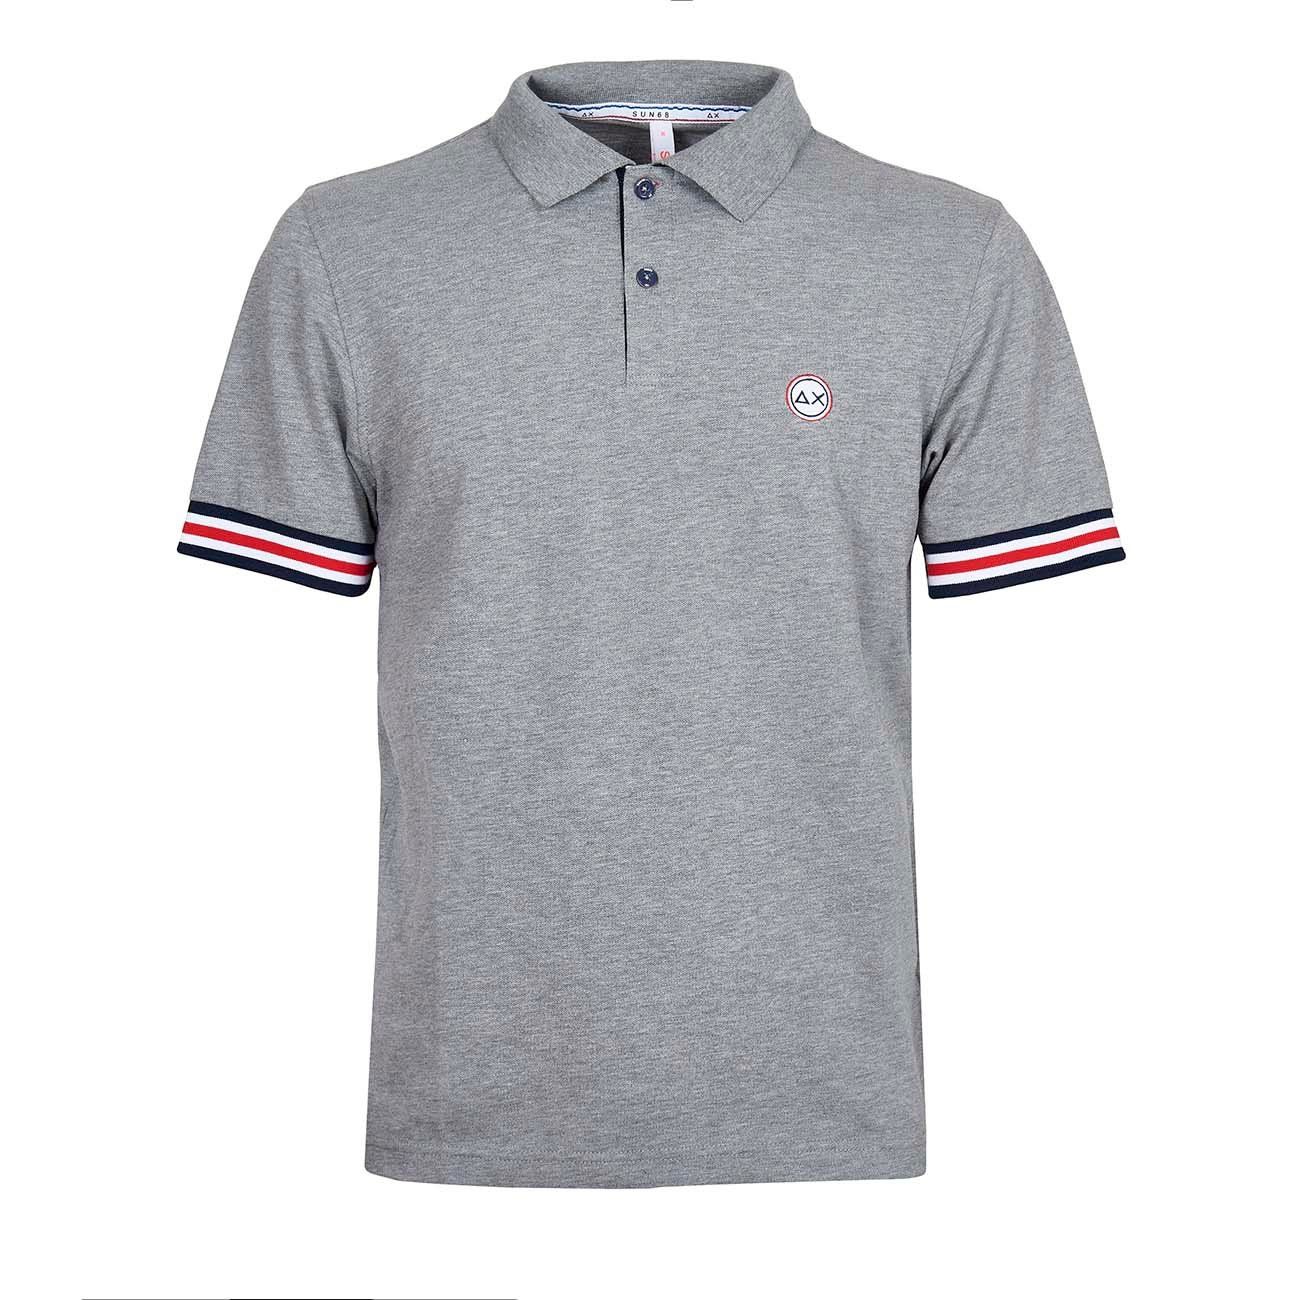 SUN68 POLO SHIRT WITH TRICOLOR STRIPES ON CUFFS AND PLACKET Man Medium ...